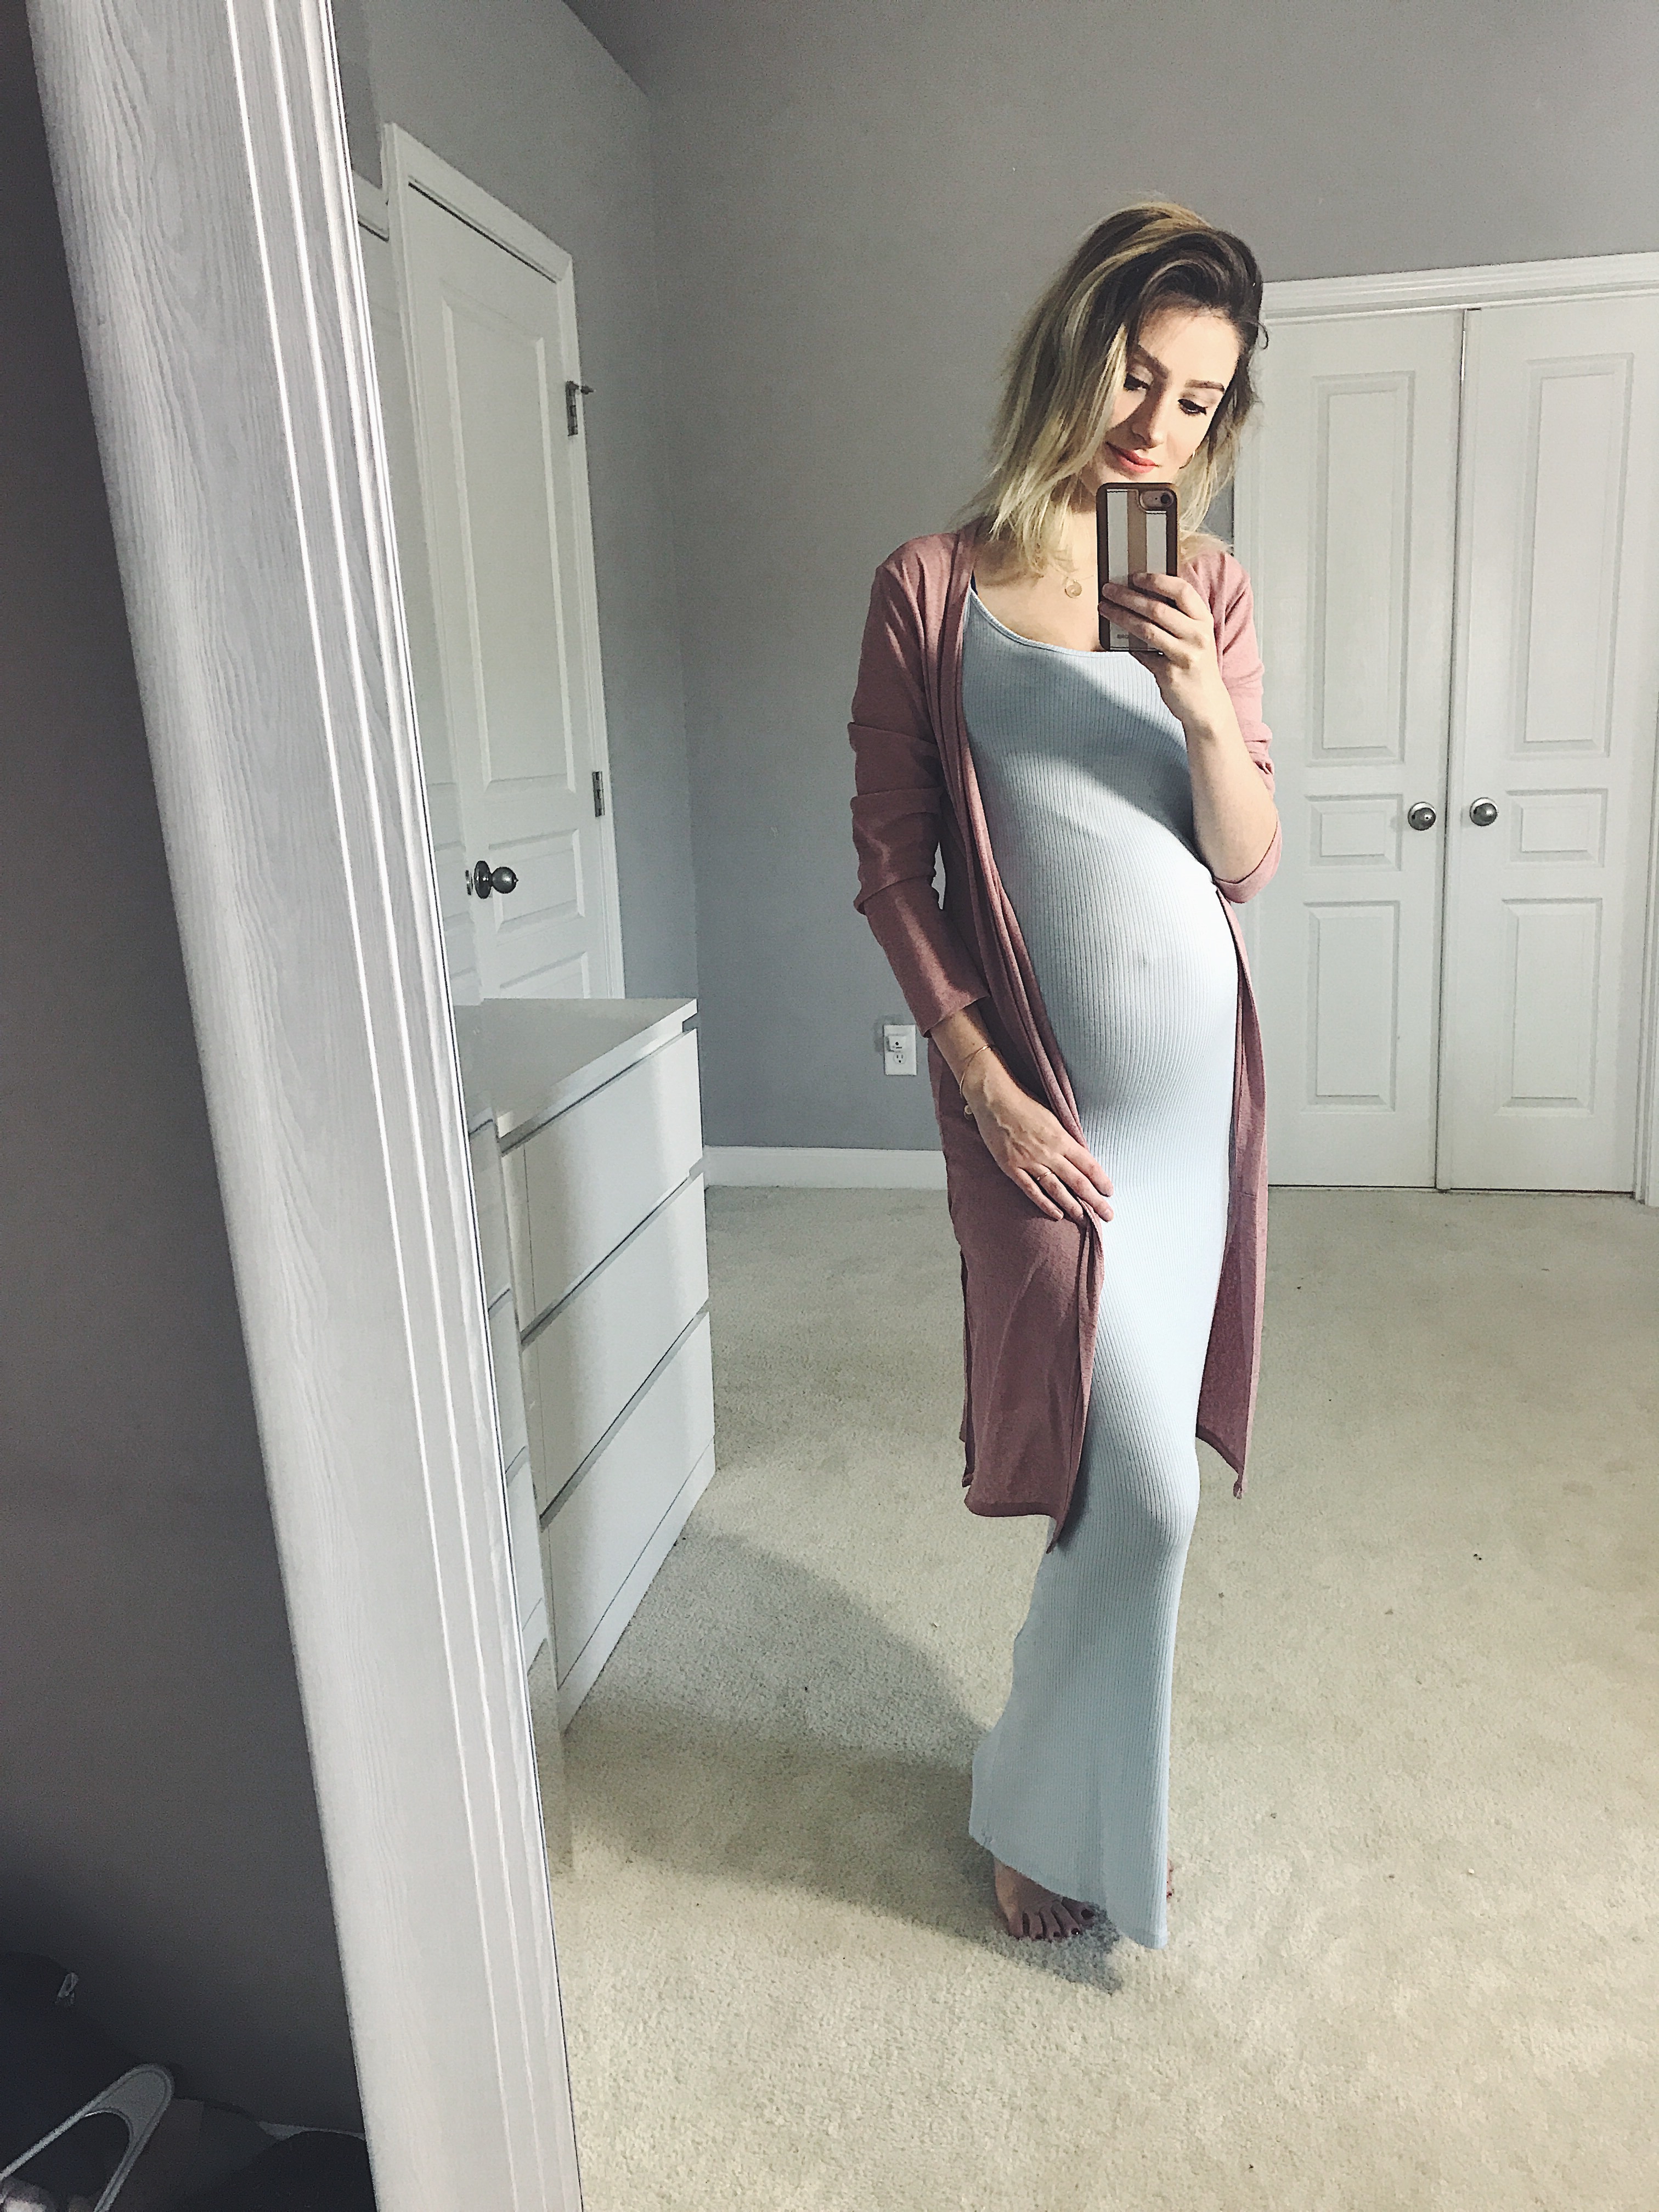 Lifestyle, fashion, and beauty blogger and vlogger Jessica Linn sharing latest Instagram Posts and maternity style outfit inspiration